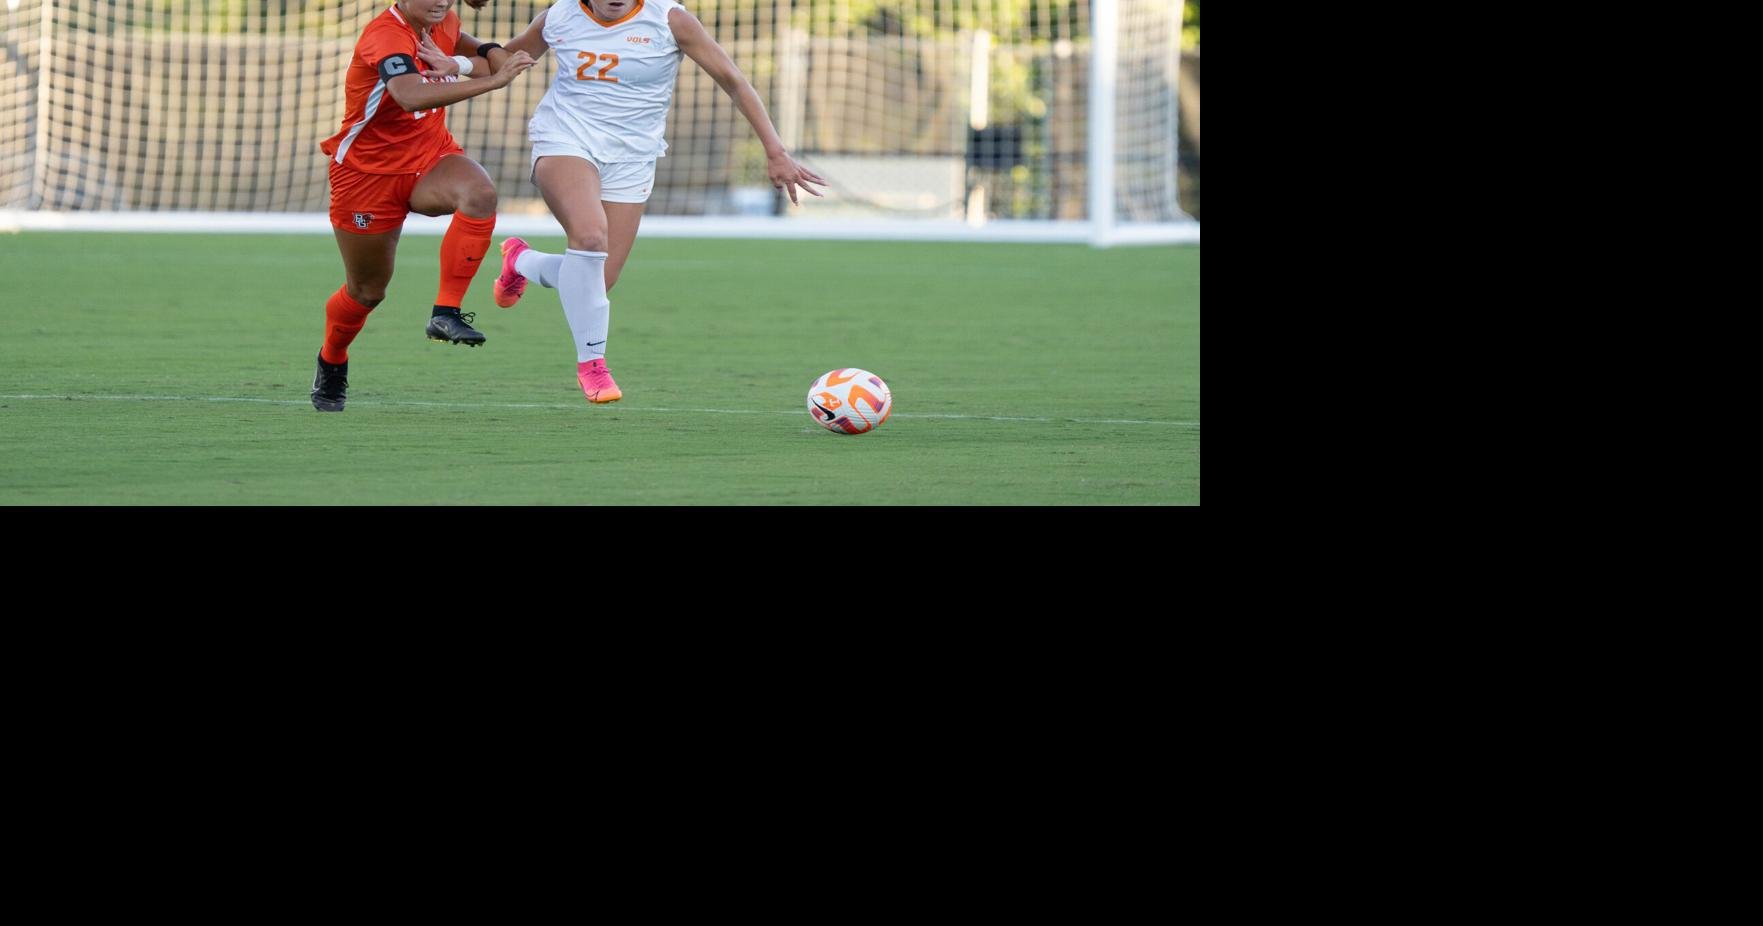 Secondhalf surge leads the Lady Vols past Bowling Green Soccer